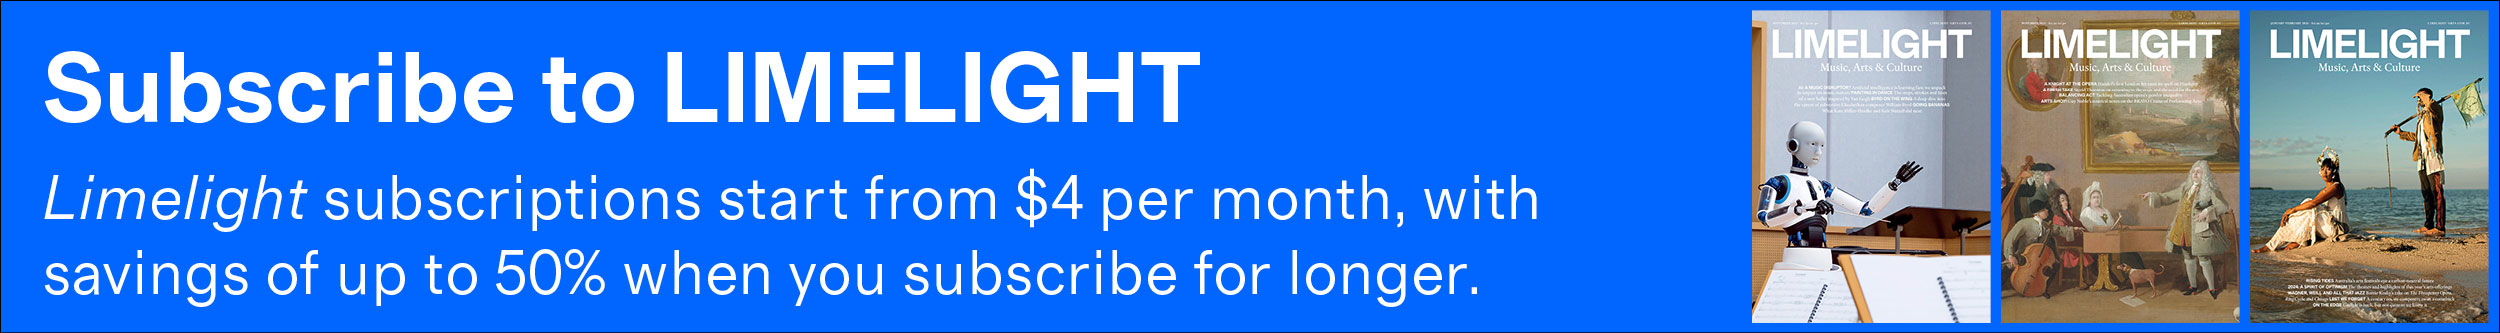 Limelight subscriptions start from $4 per month, with savings of up to 50% when you subscribe for longer.